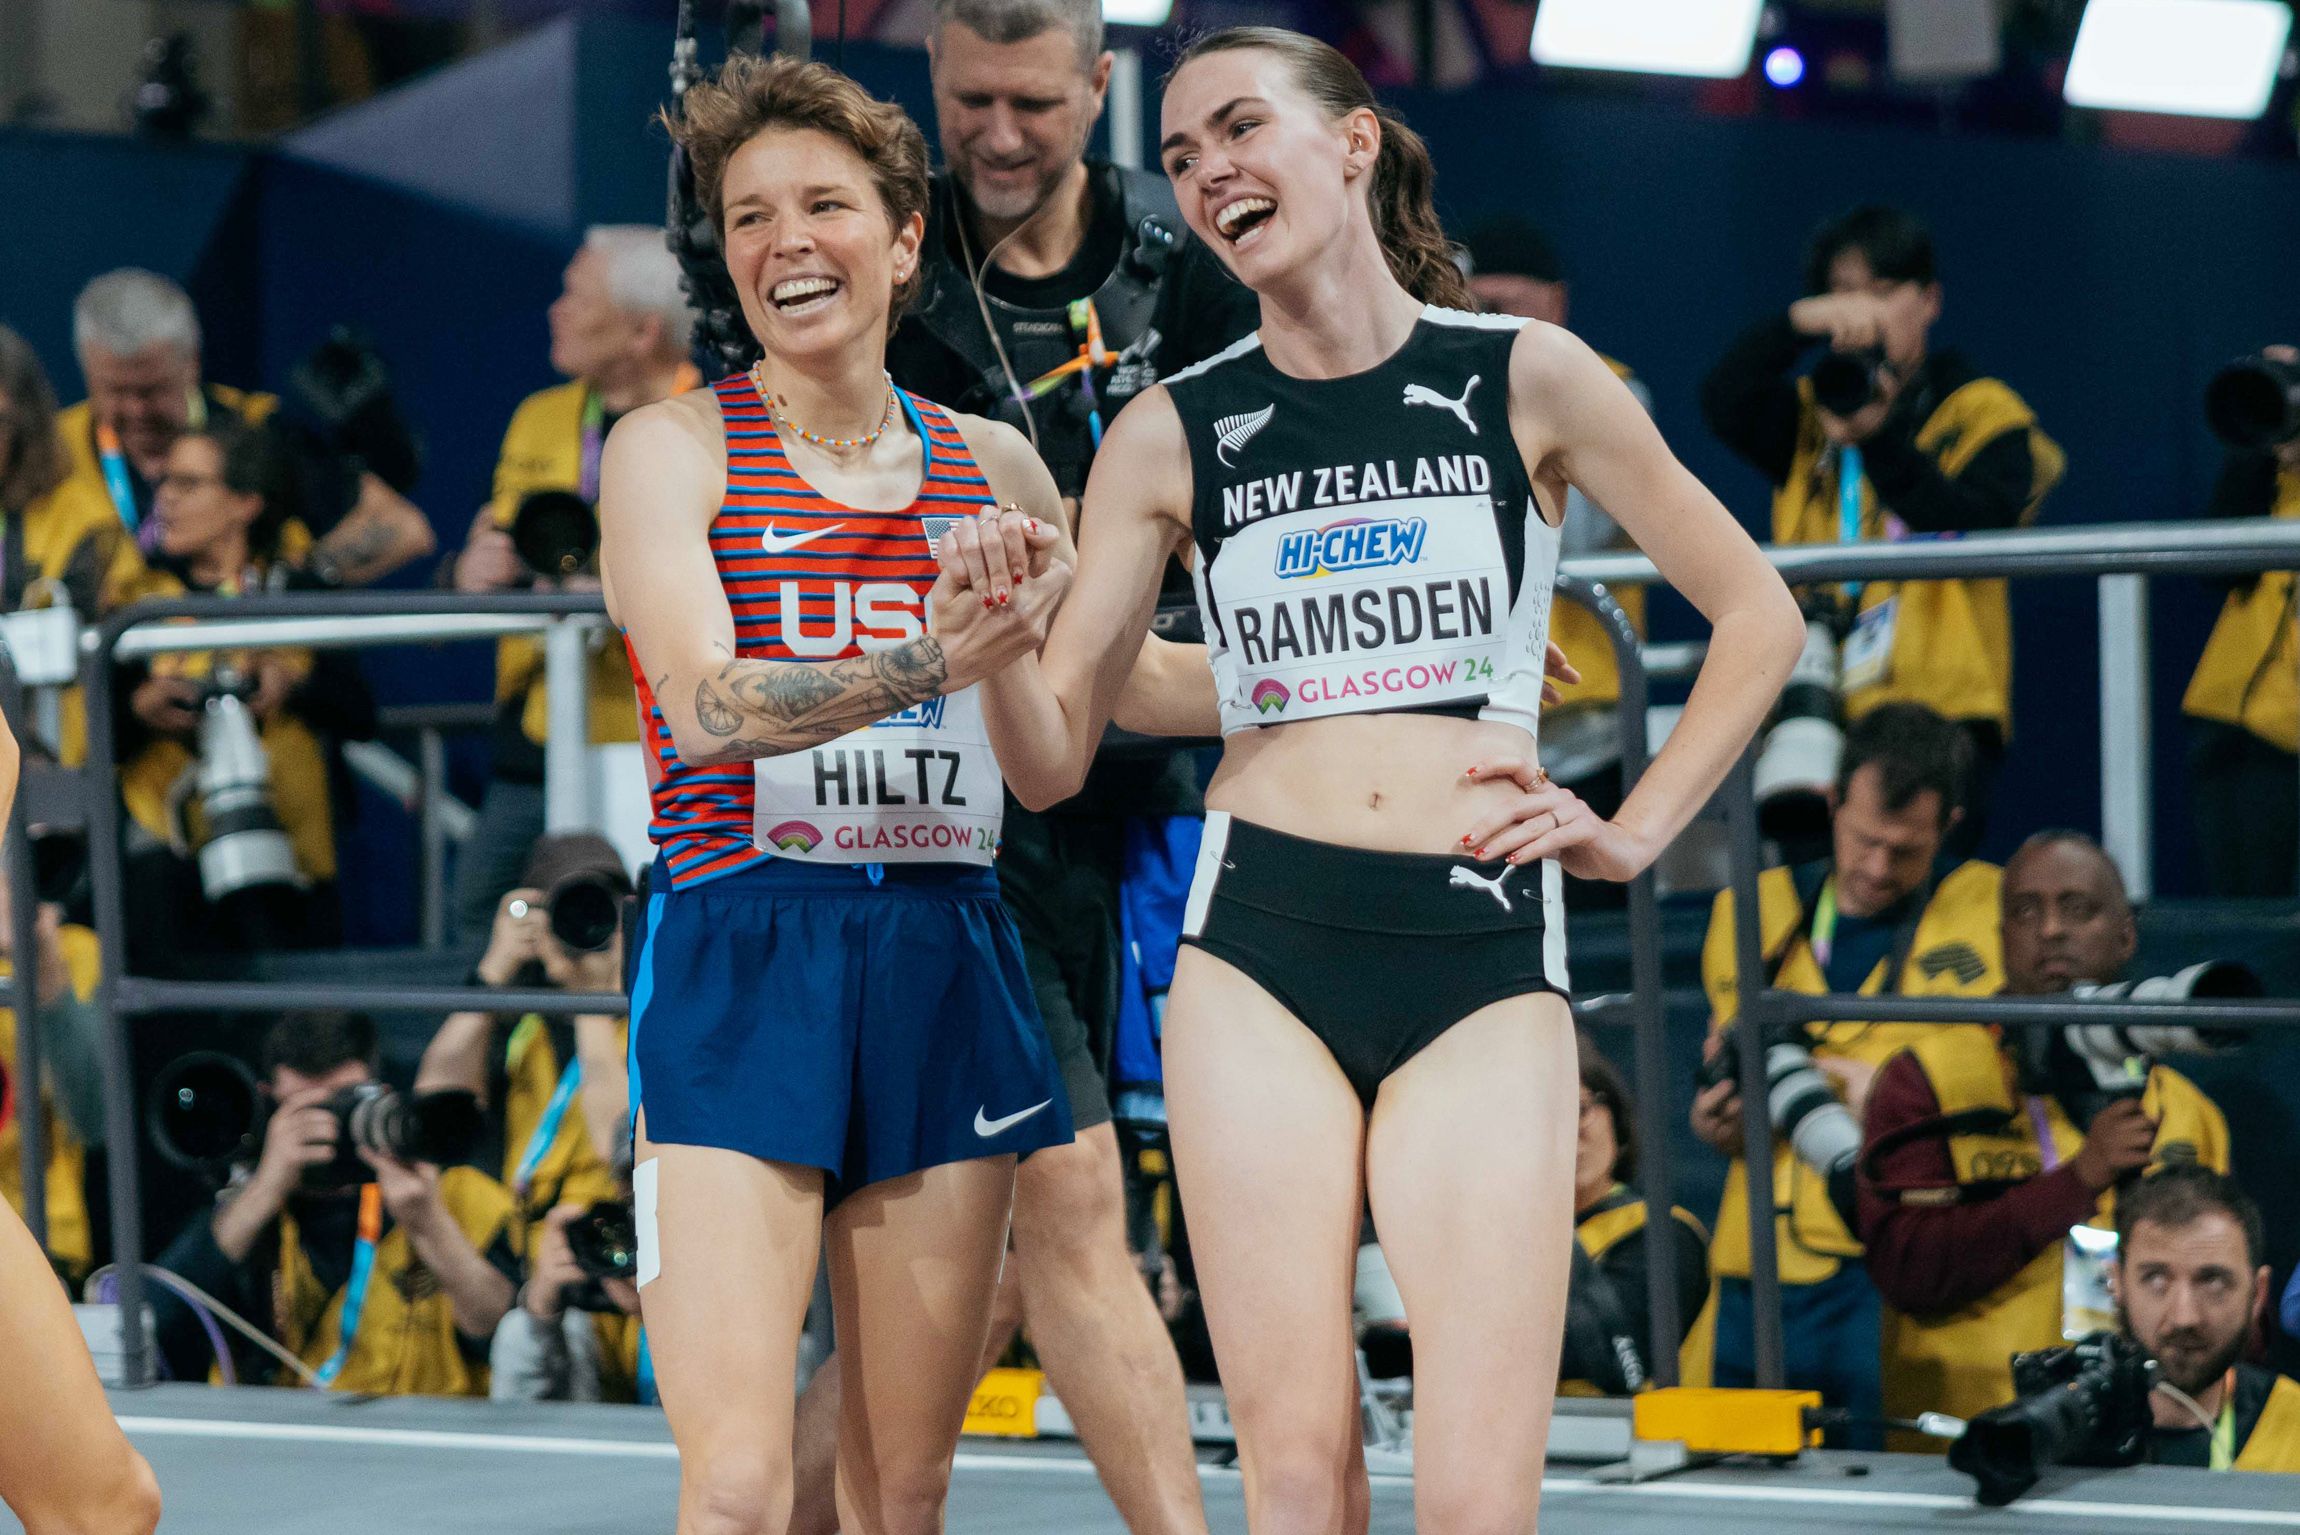 Nikki Hiltz and Maia Ramsden after the 1500m at the World Indoor Championships